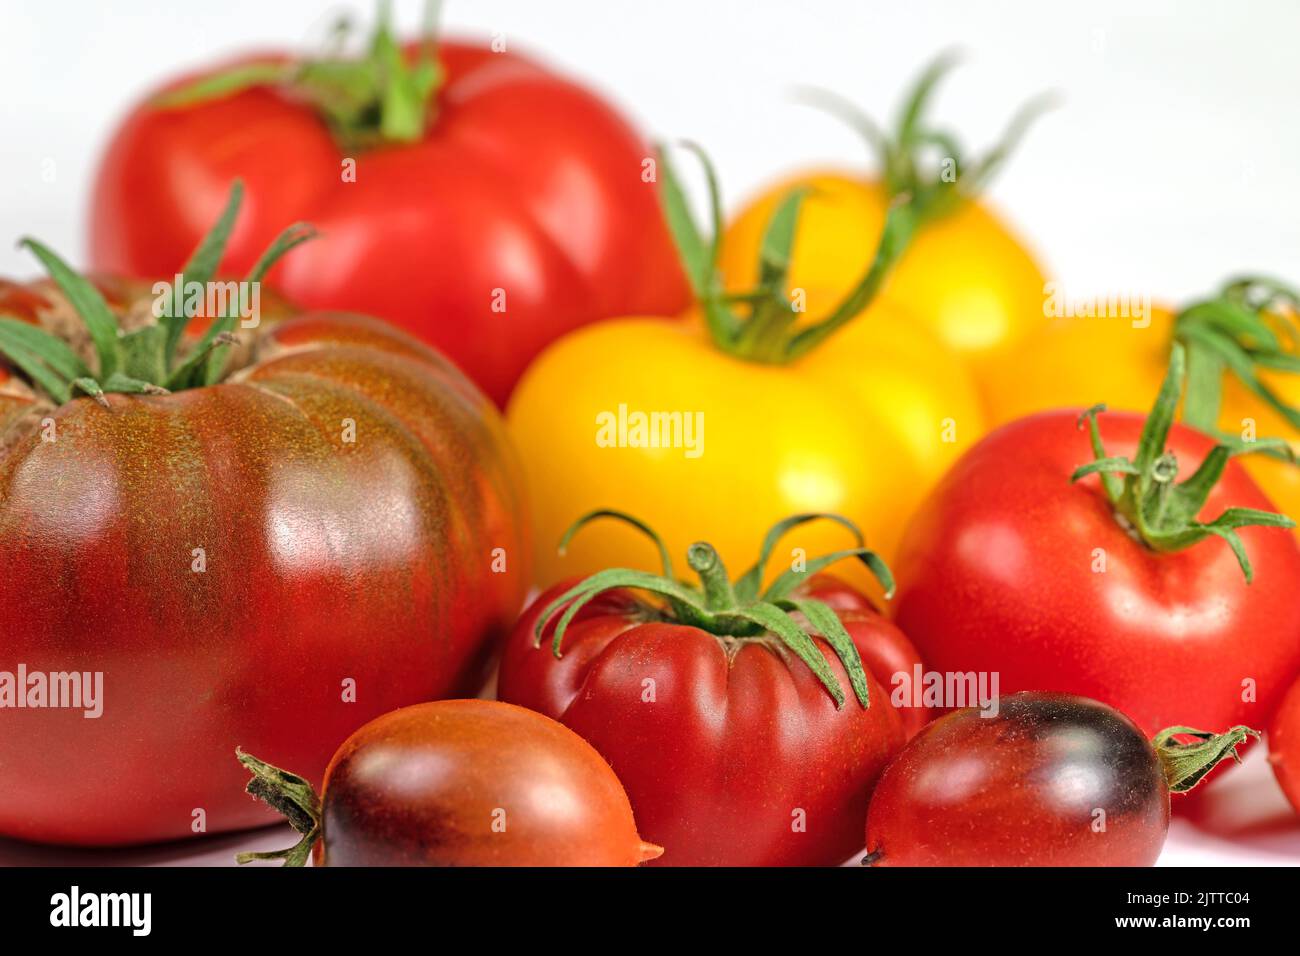 Red and yellow tomatoes in front of white background Stock Photo